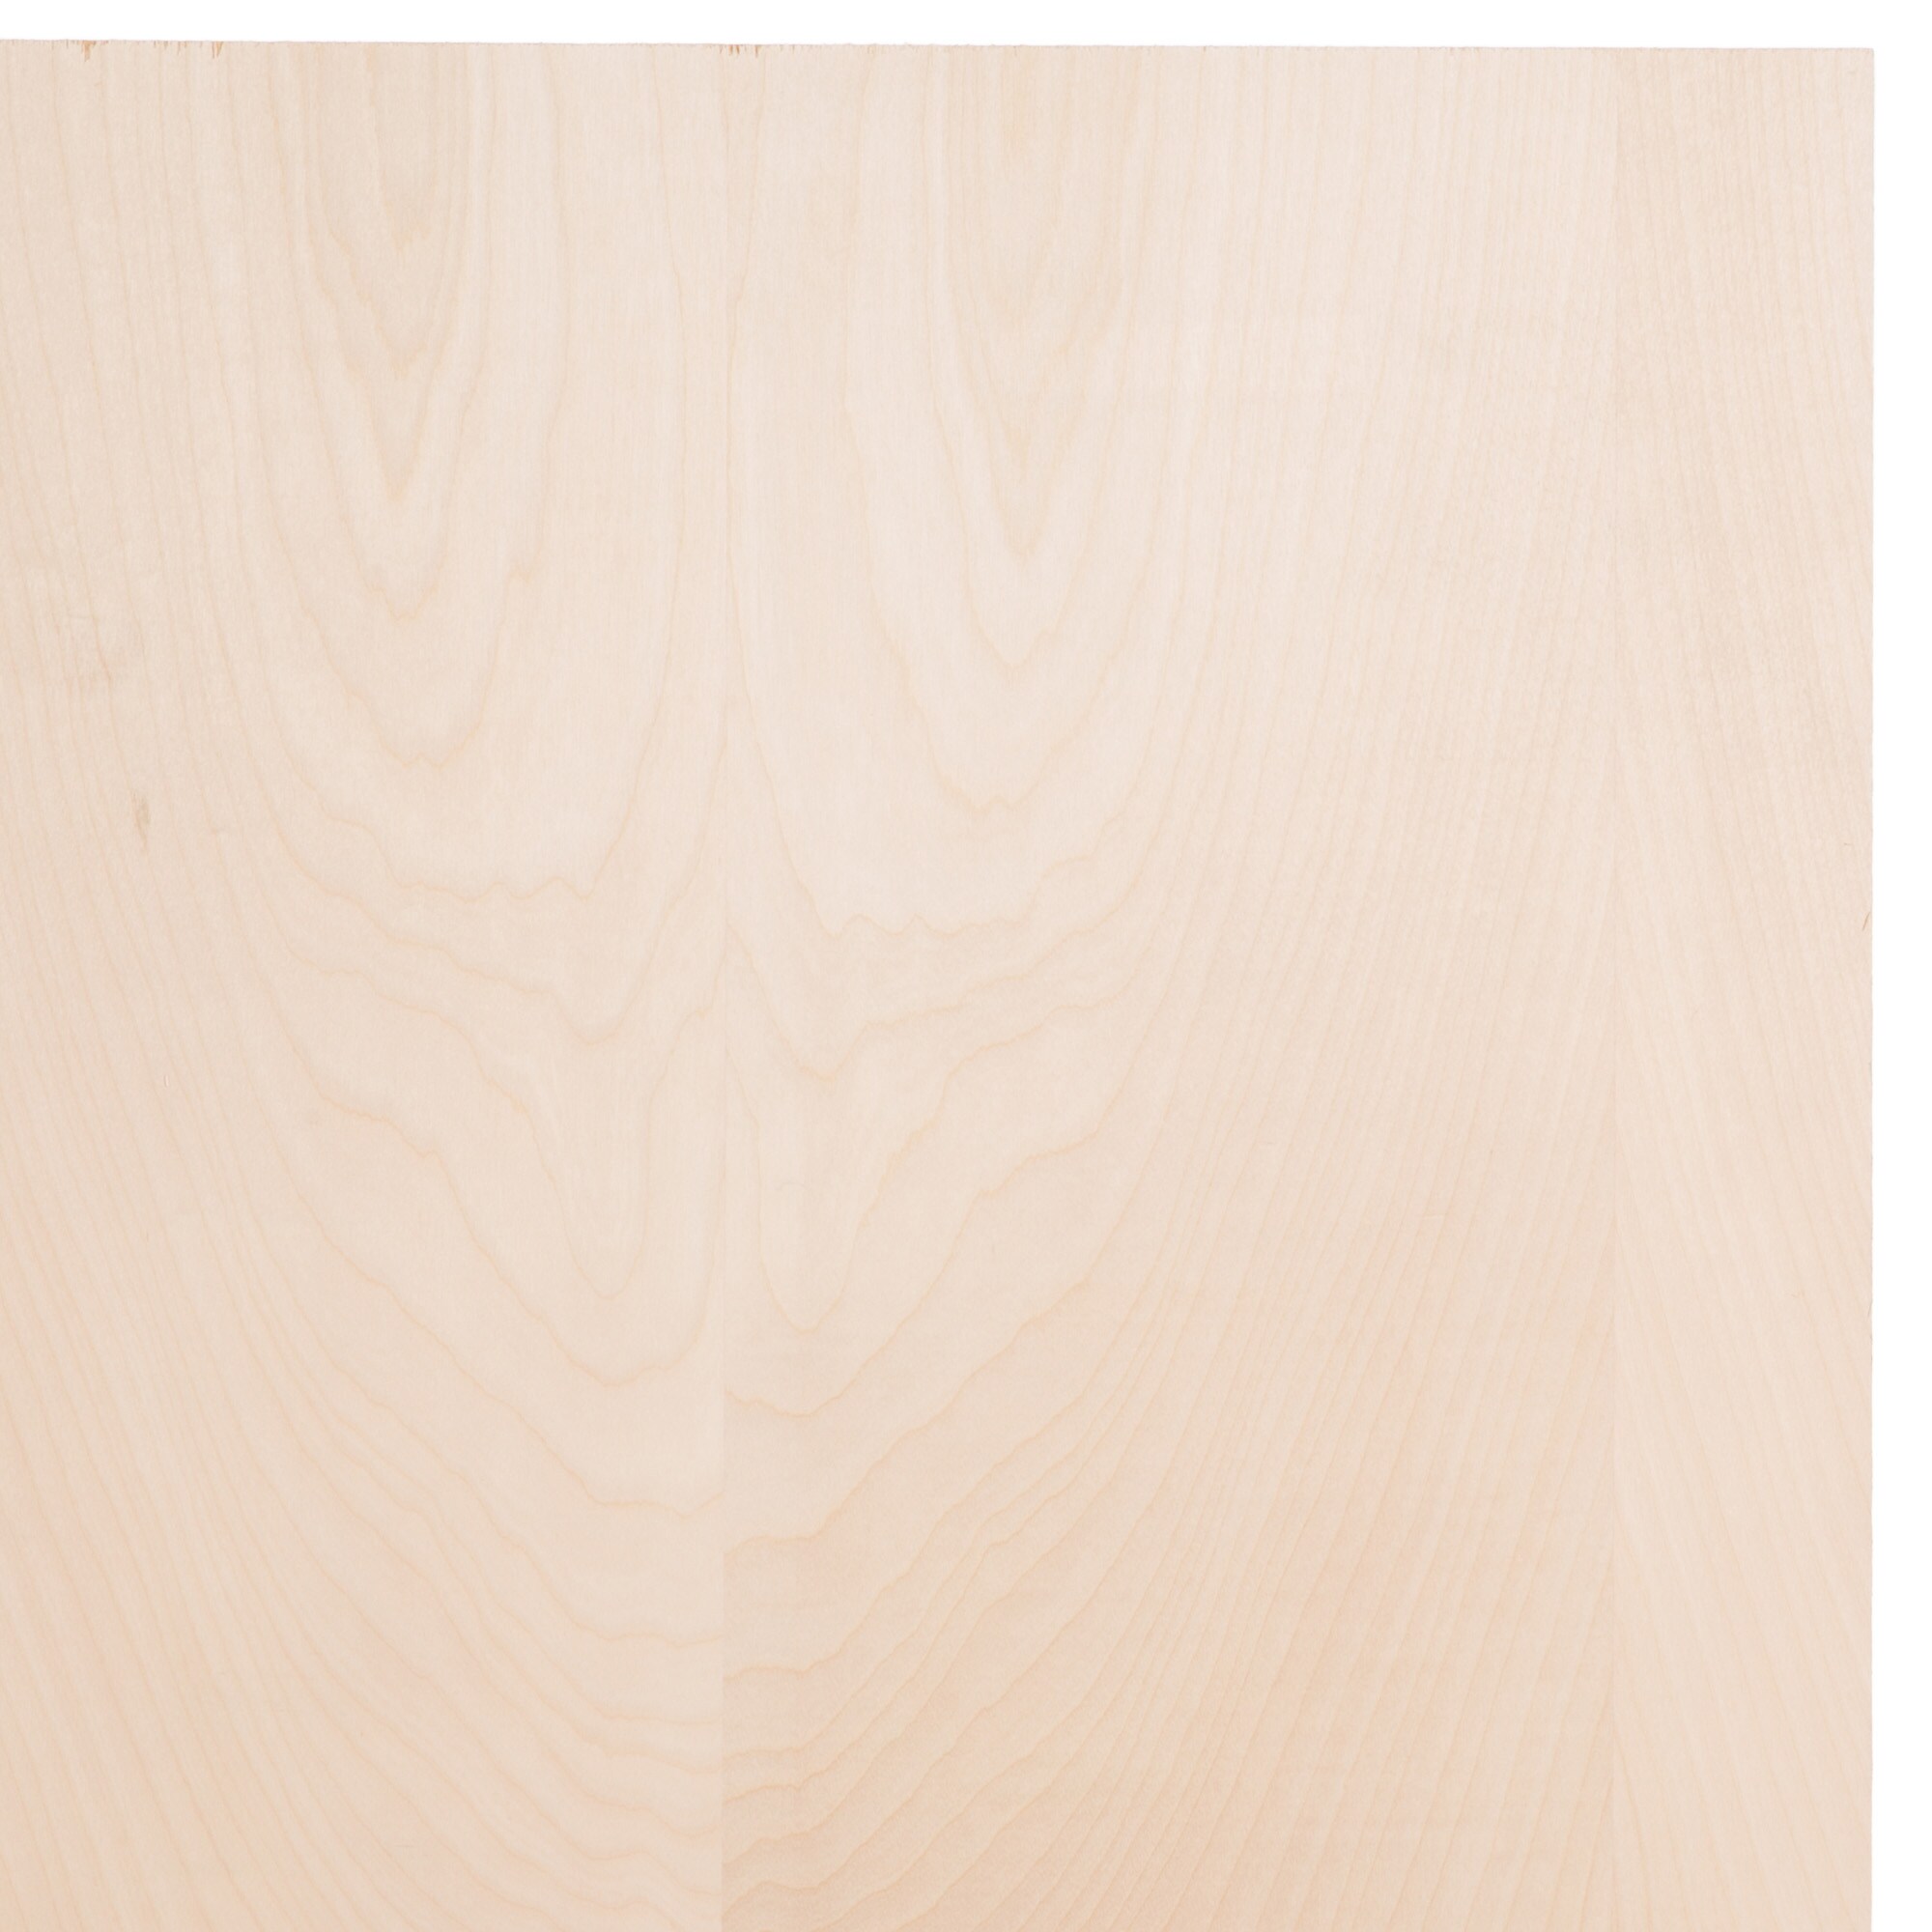 Columbia Forest Products 3/4 in. x 4 ft. x 8 ft. PureBond Birch